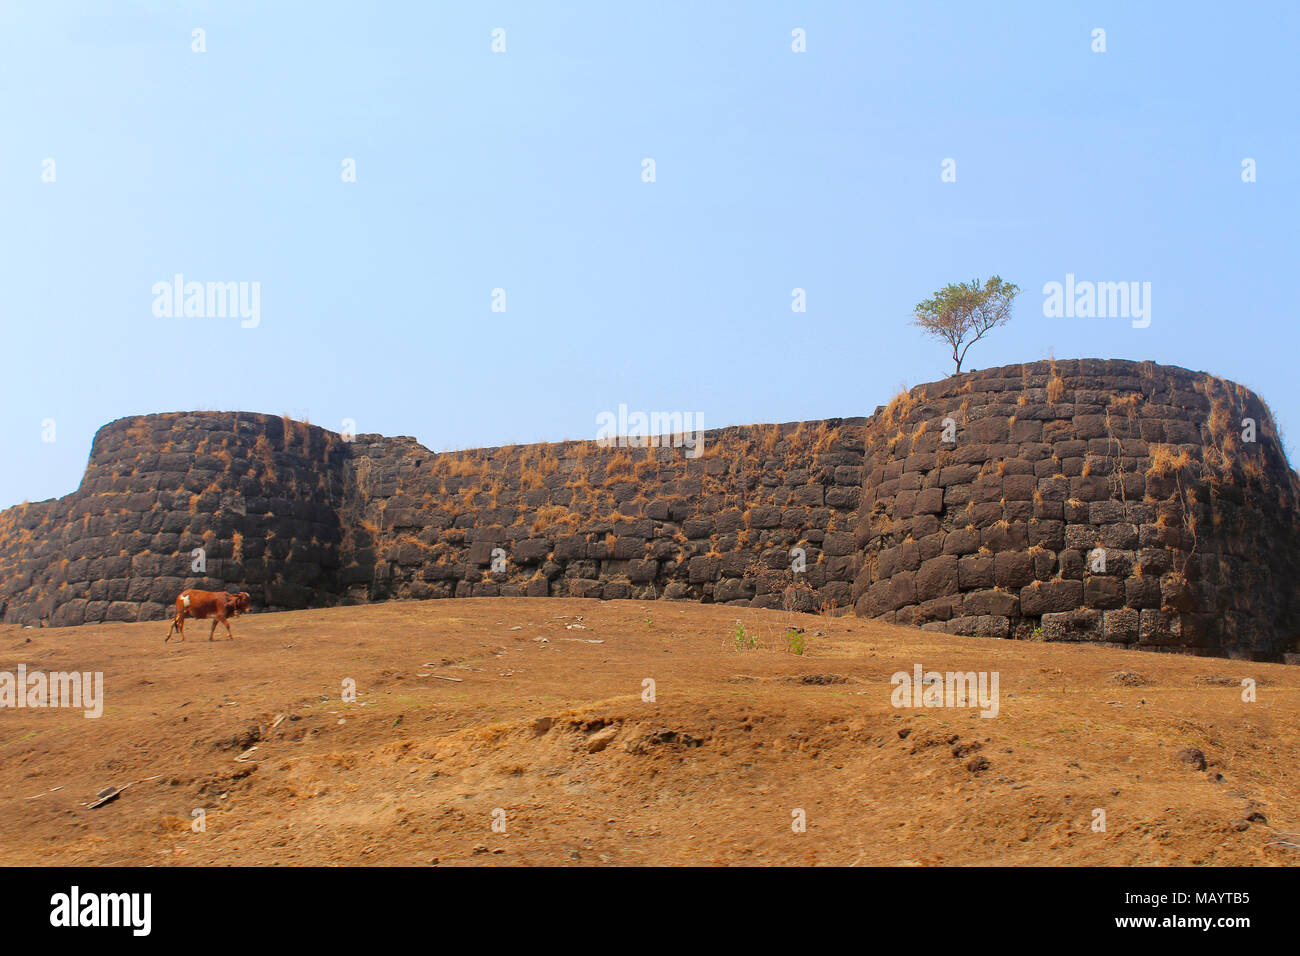 Back view of Goa Fort, Fateghad, Kokan. To protect Suvarnadurga, 3 forts named Goa fort (not to be confused with Goa state), Kanakdurga and Fategard w Stock Photo